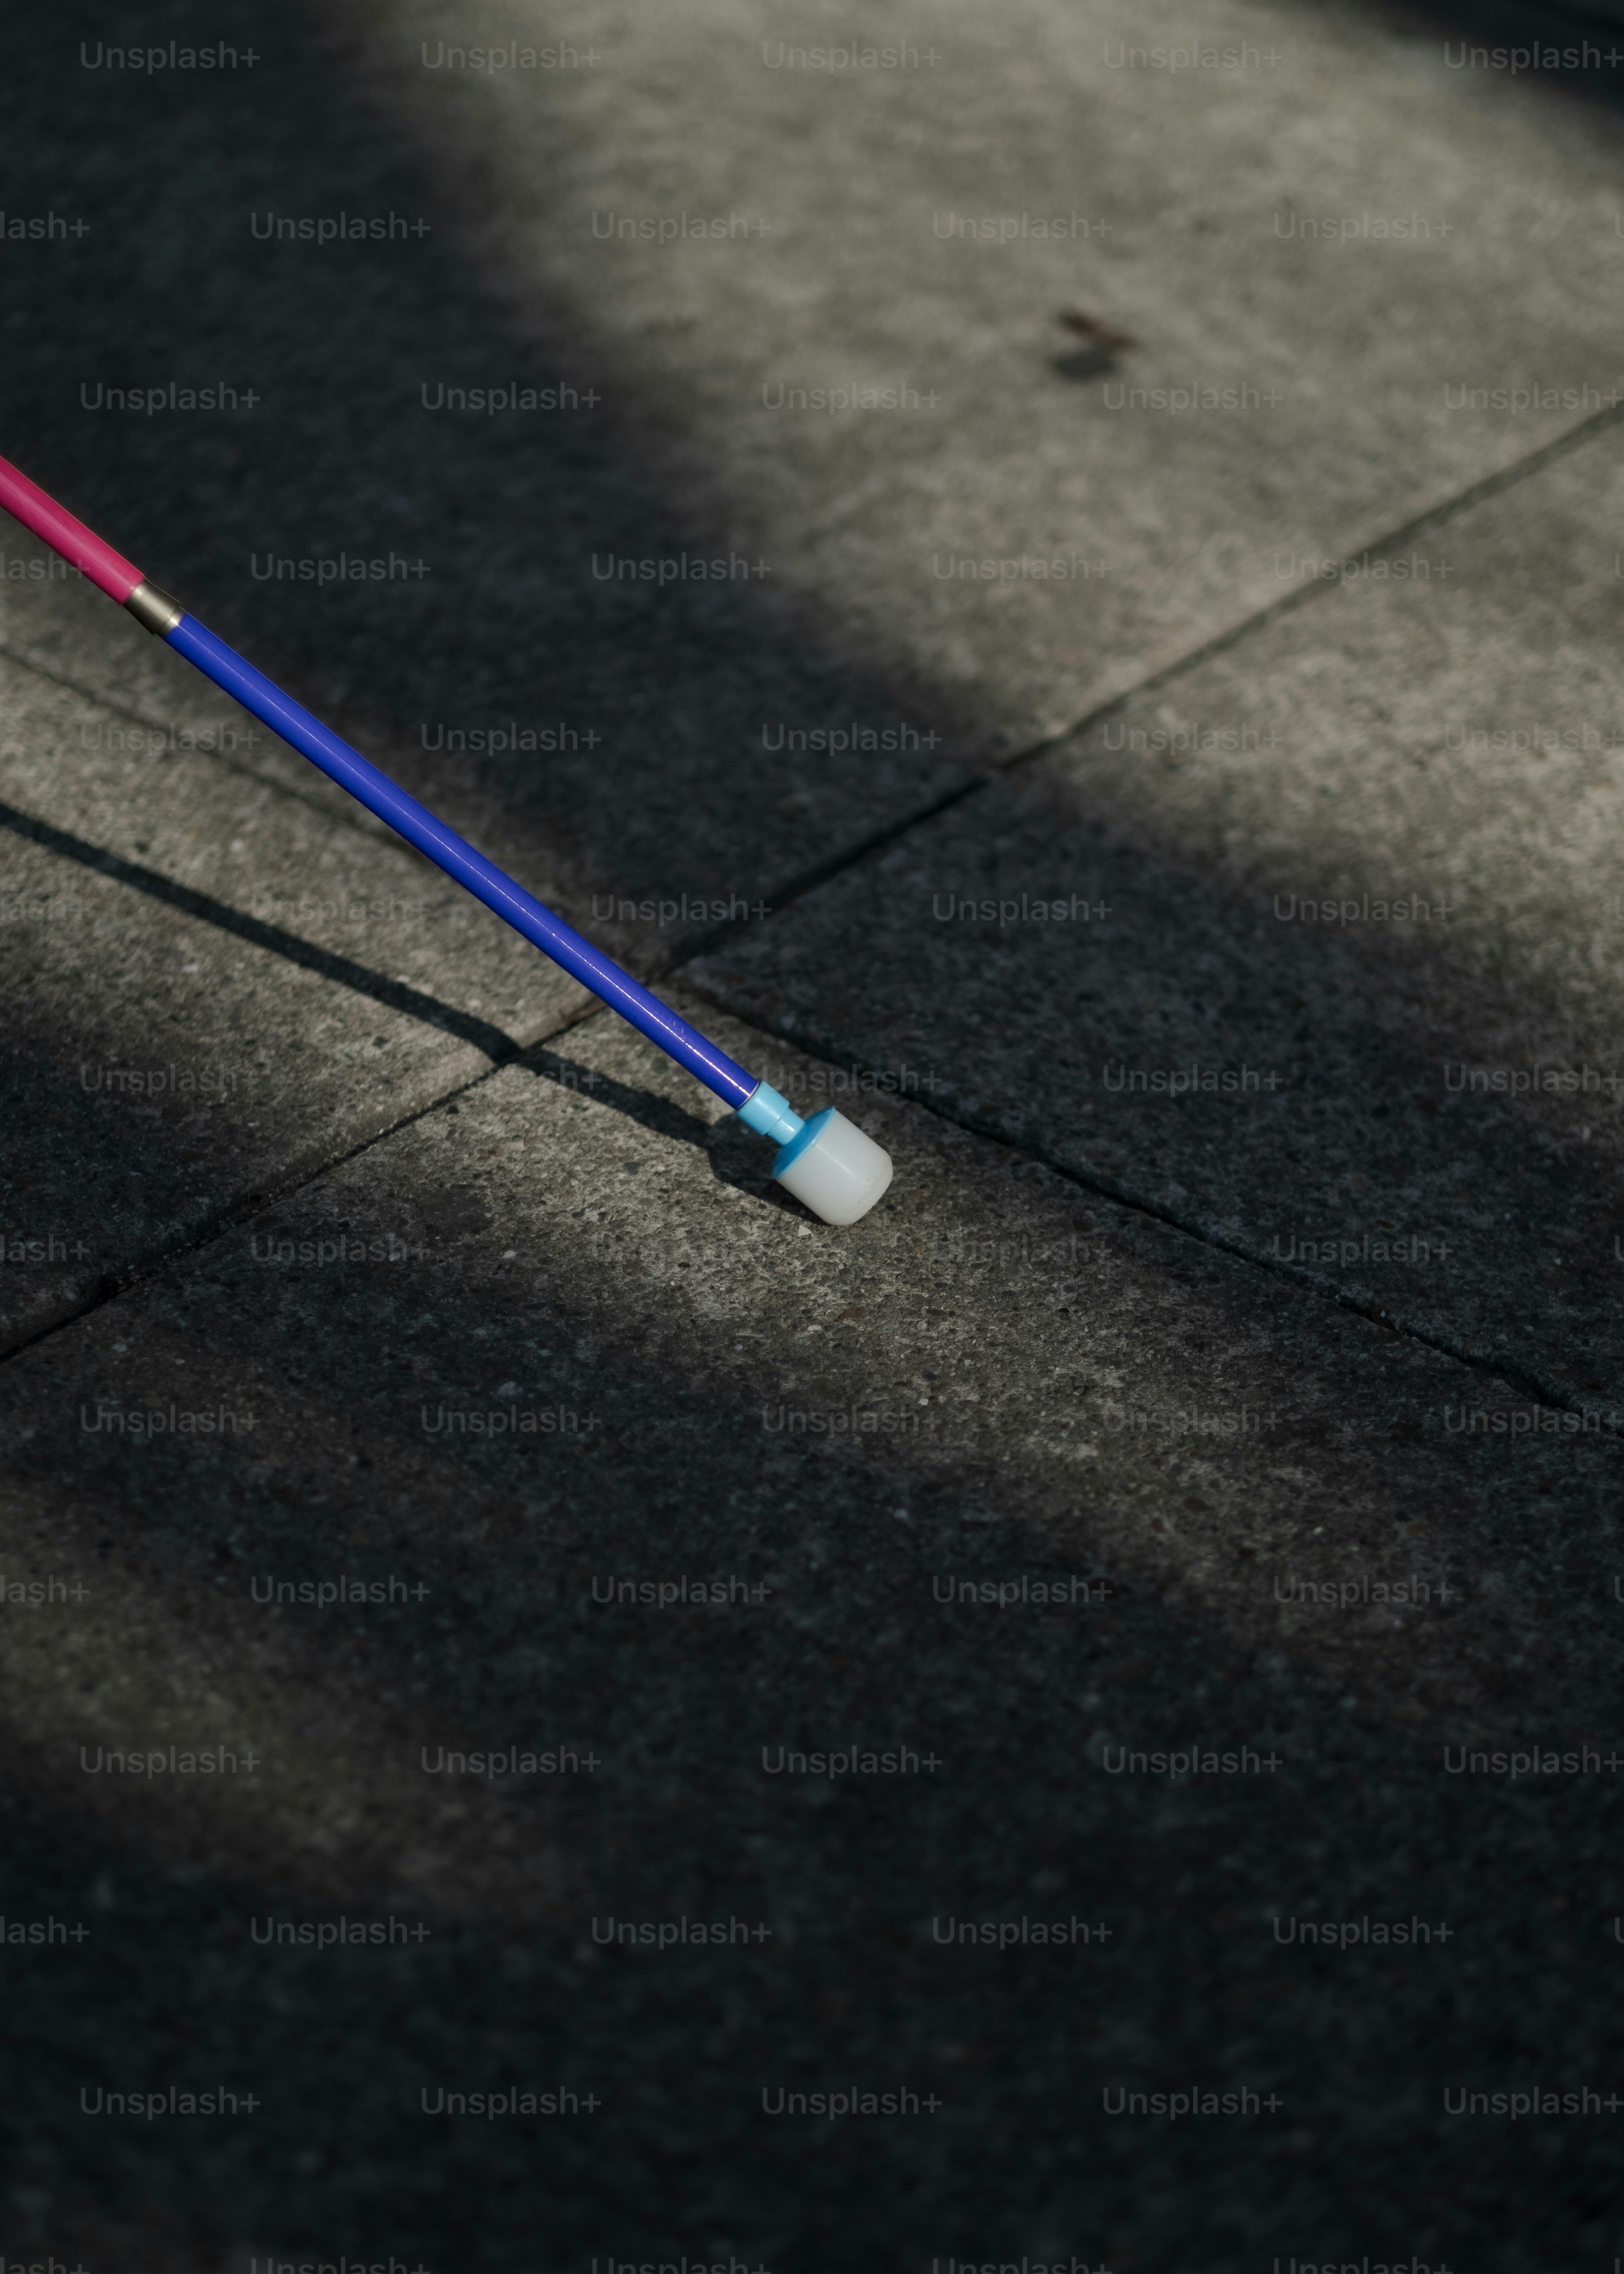 Tiffany, a visually impaired woman, expresses the use of her guide cane (also known as a white cane) while taking public transit and walking around the Bay Area.